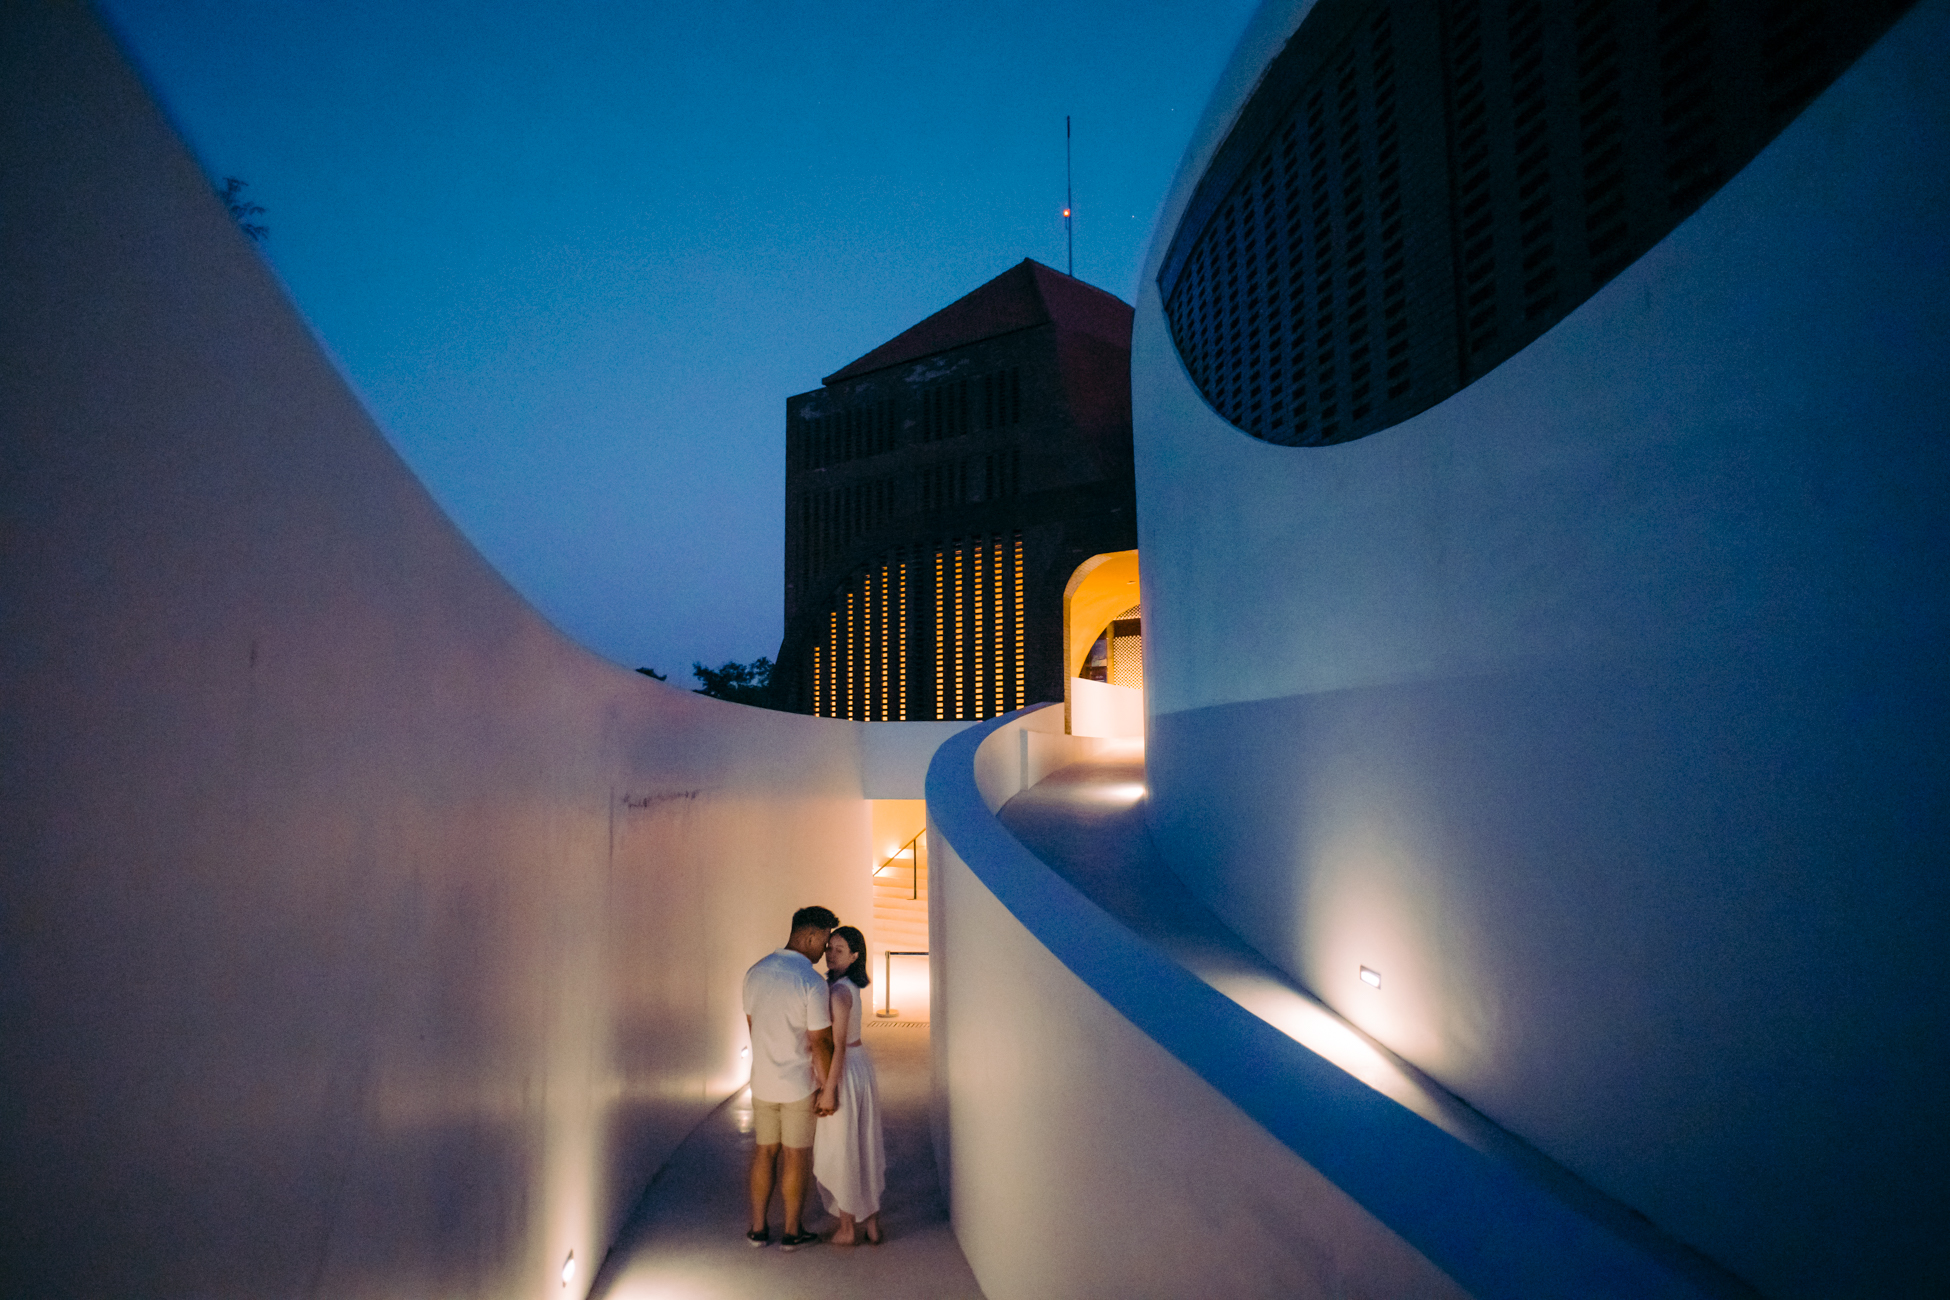 Romantic wedding proposal ideas in Cafe del Mar Bali at the lobby entrance